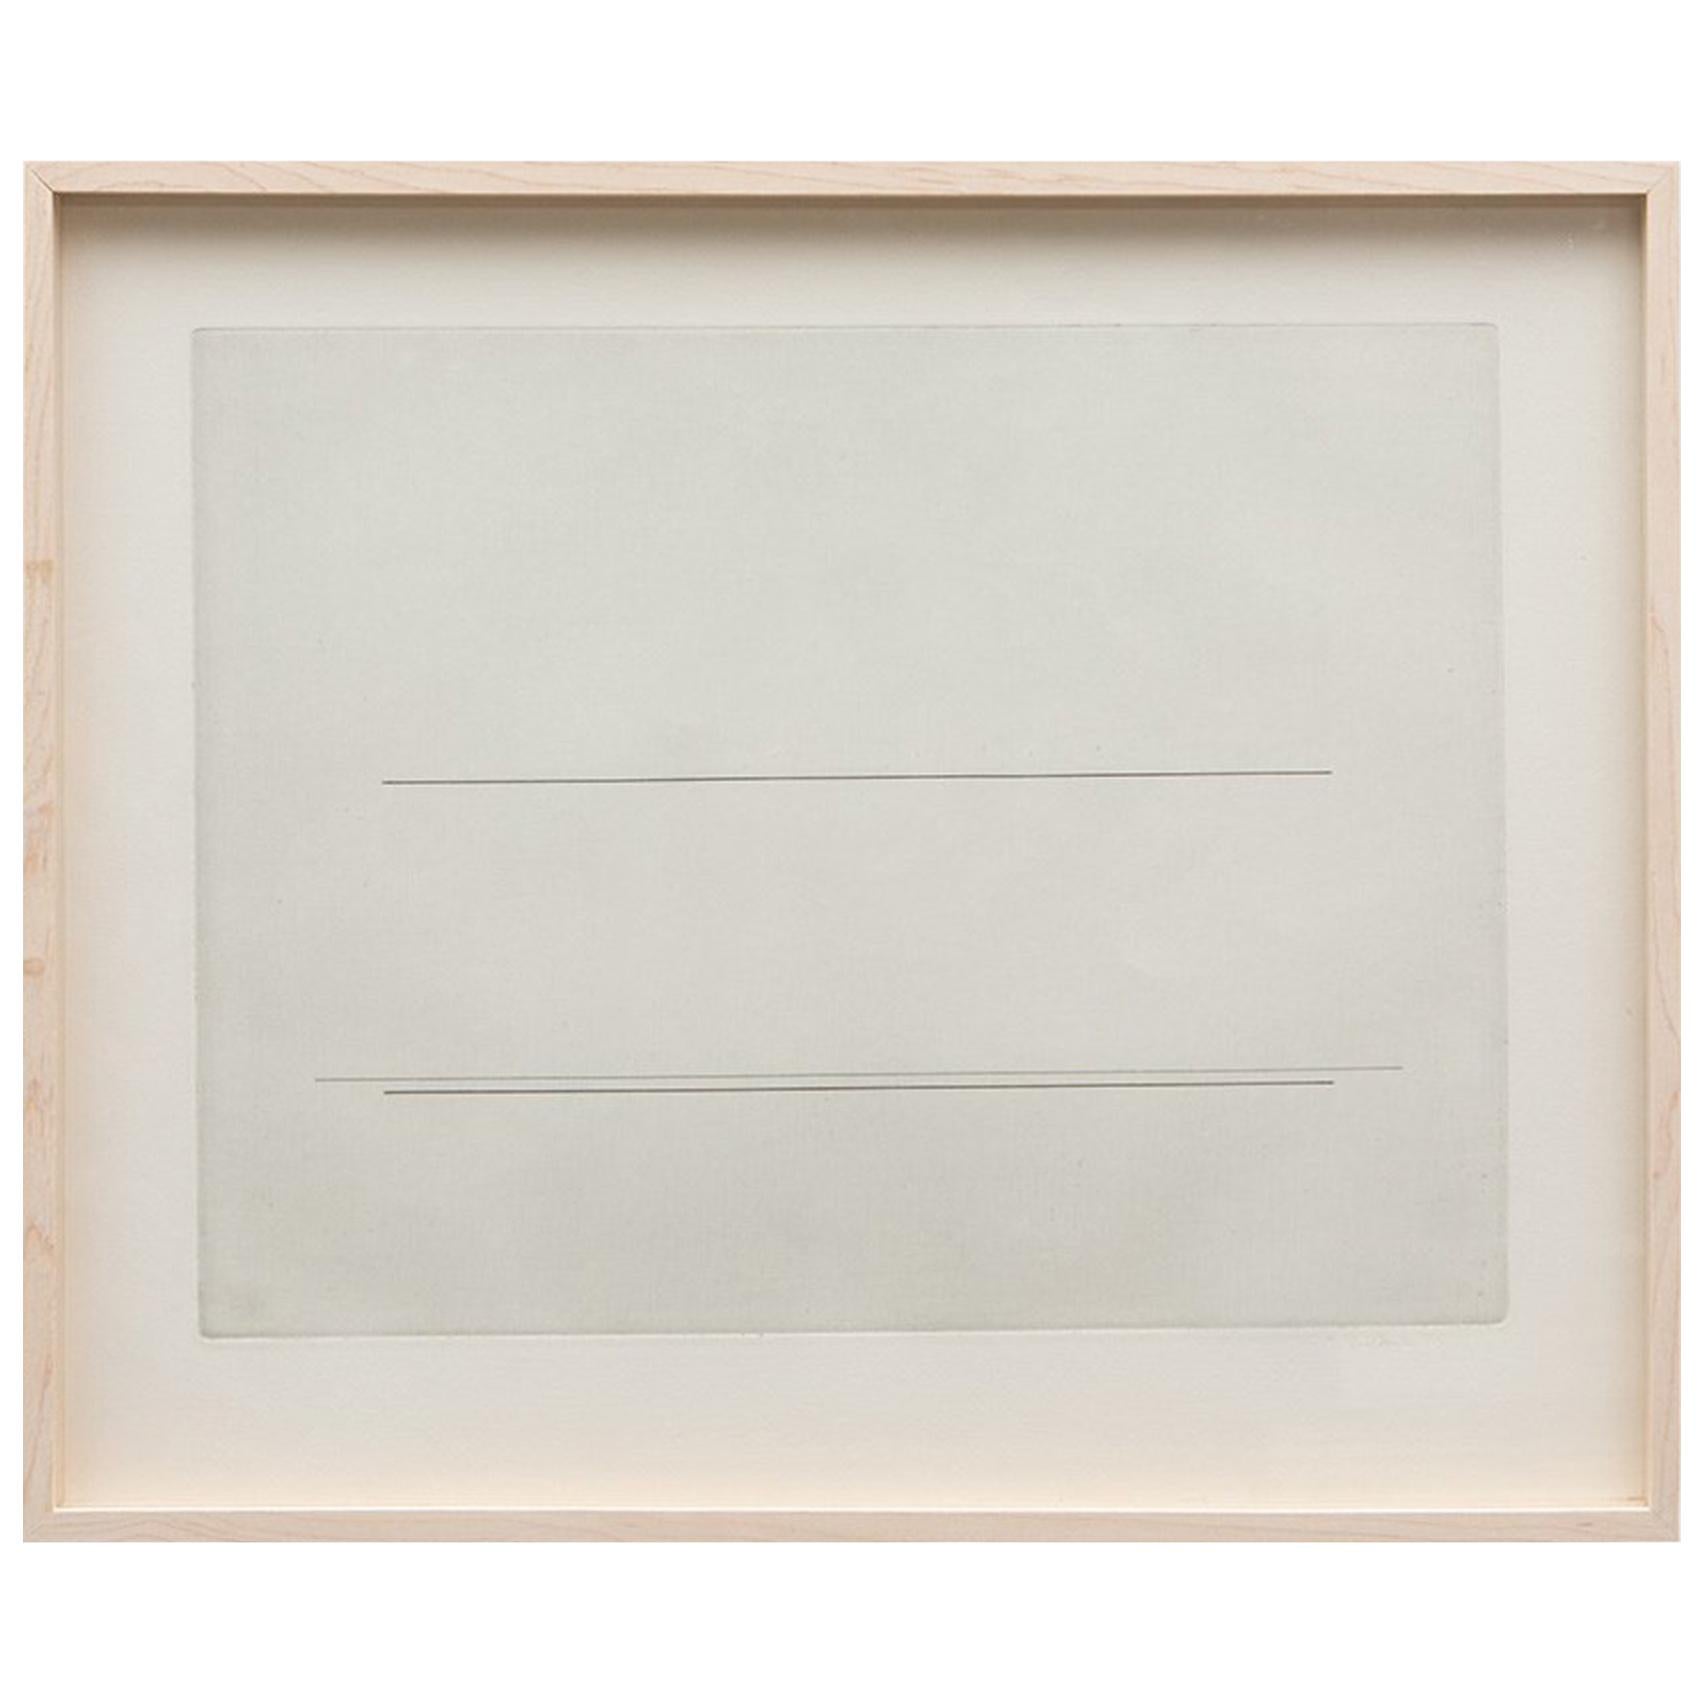 1970s "Waagerechte Linien" Etching by Fred Sandback For Sale